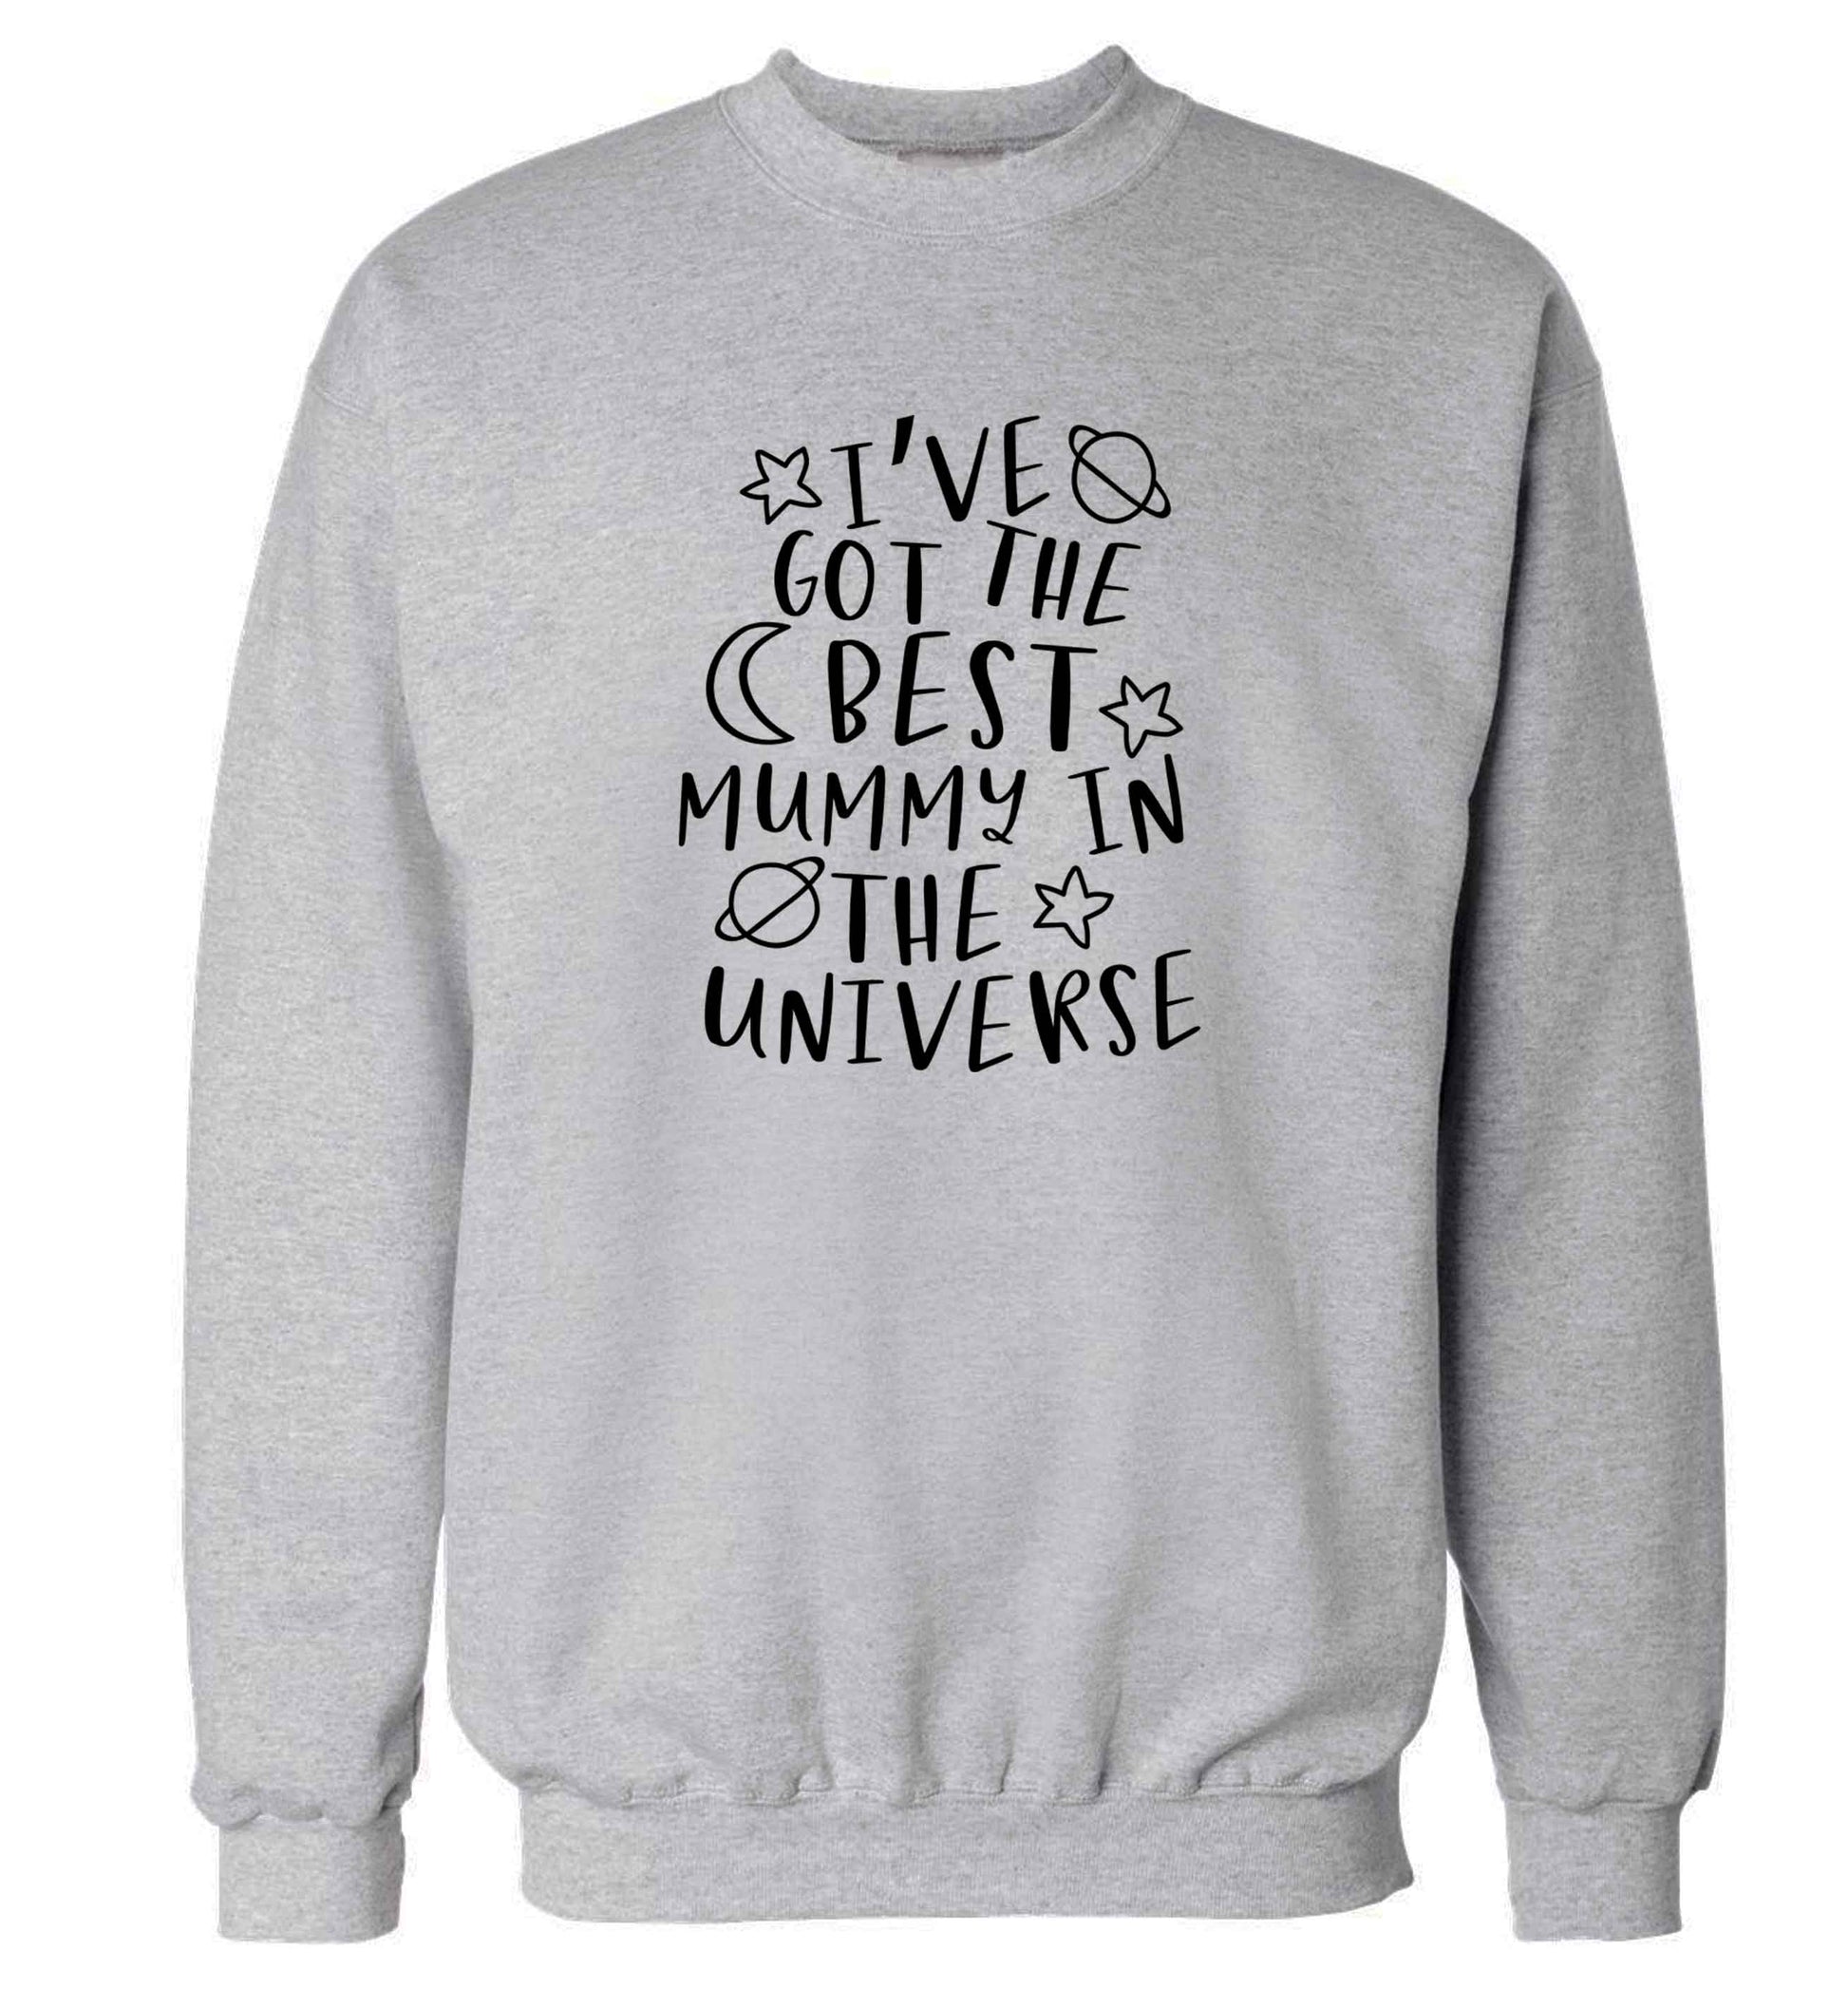 I've got the best mummy in the universe adult's unisex grey sweater 2XL